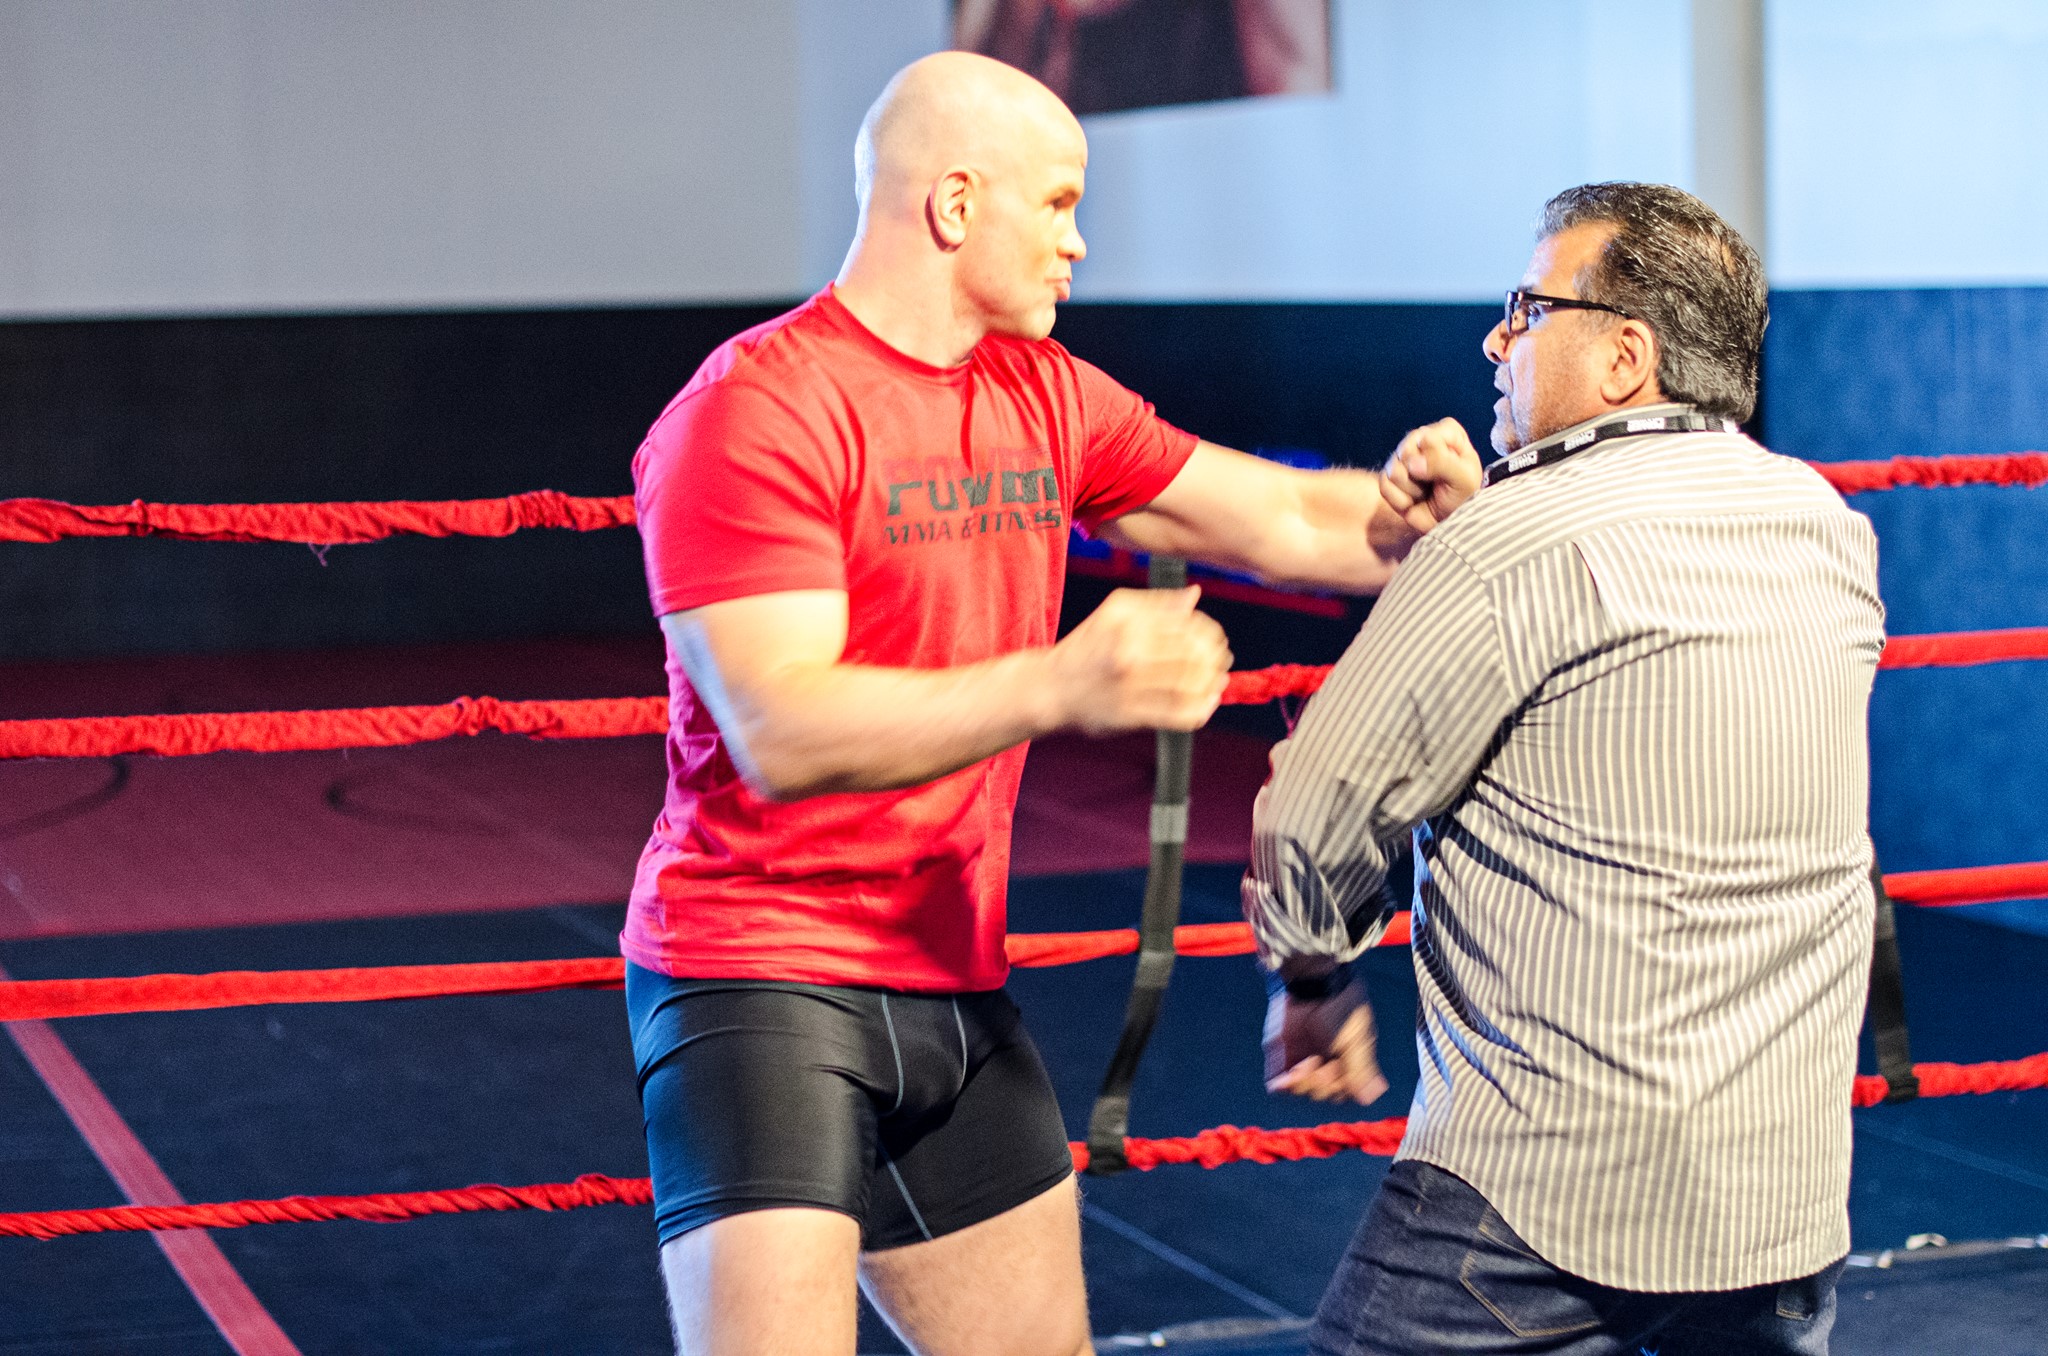 Director George Nemeh and UFC Current Kick Boxer Mr Ryan Jimmo goofing during our shoot...Survived, you can see my eye glasses were in tact...